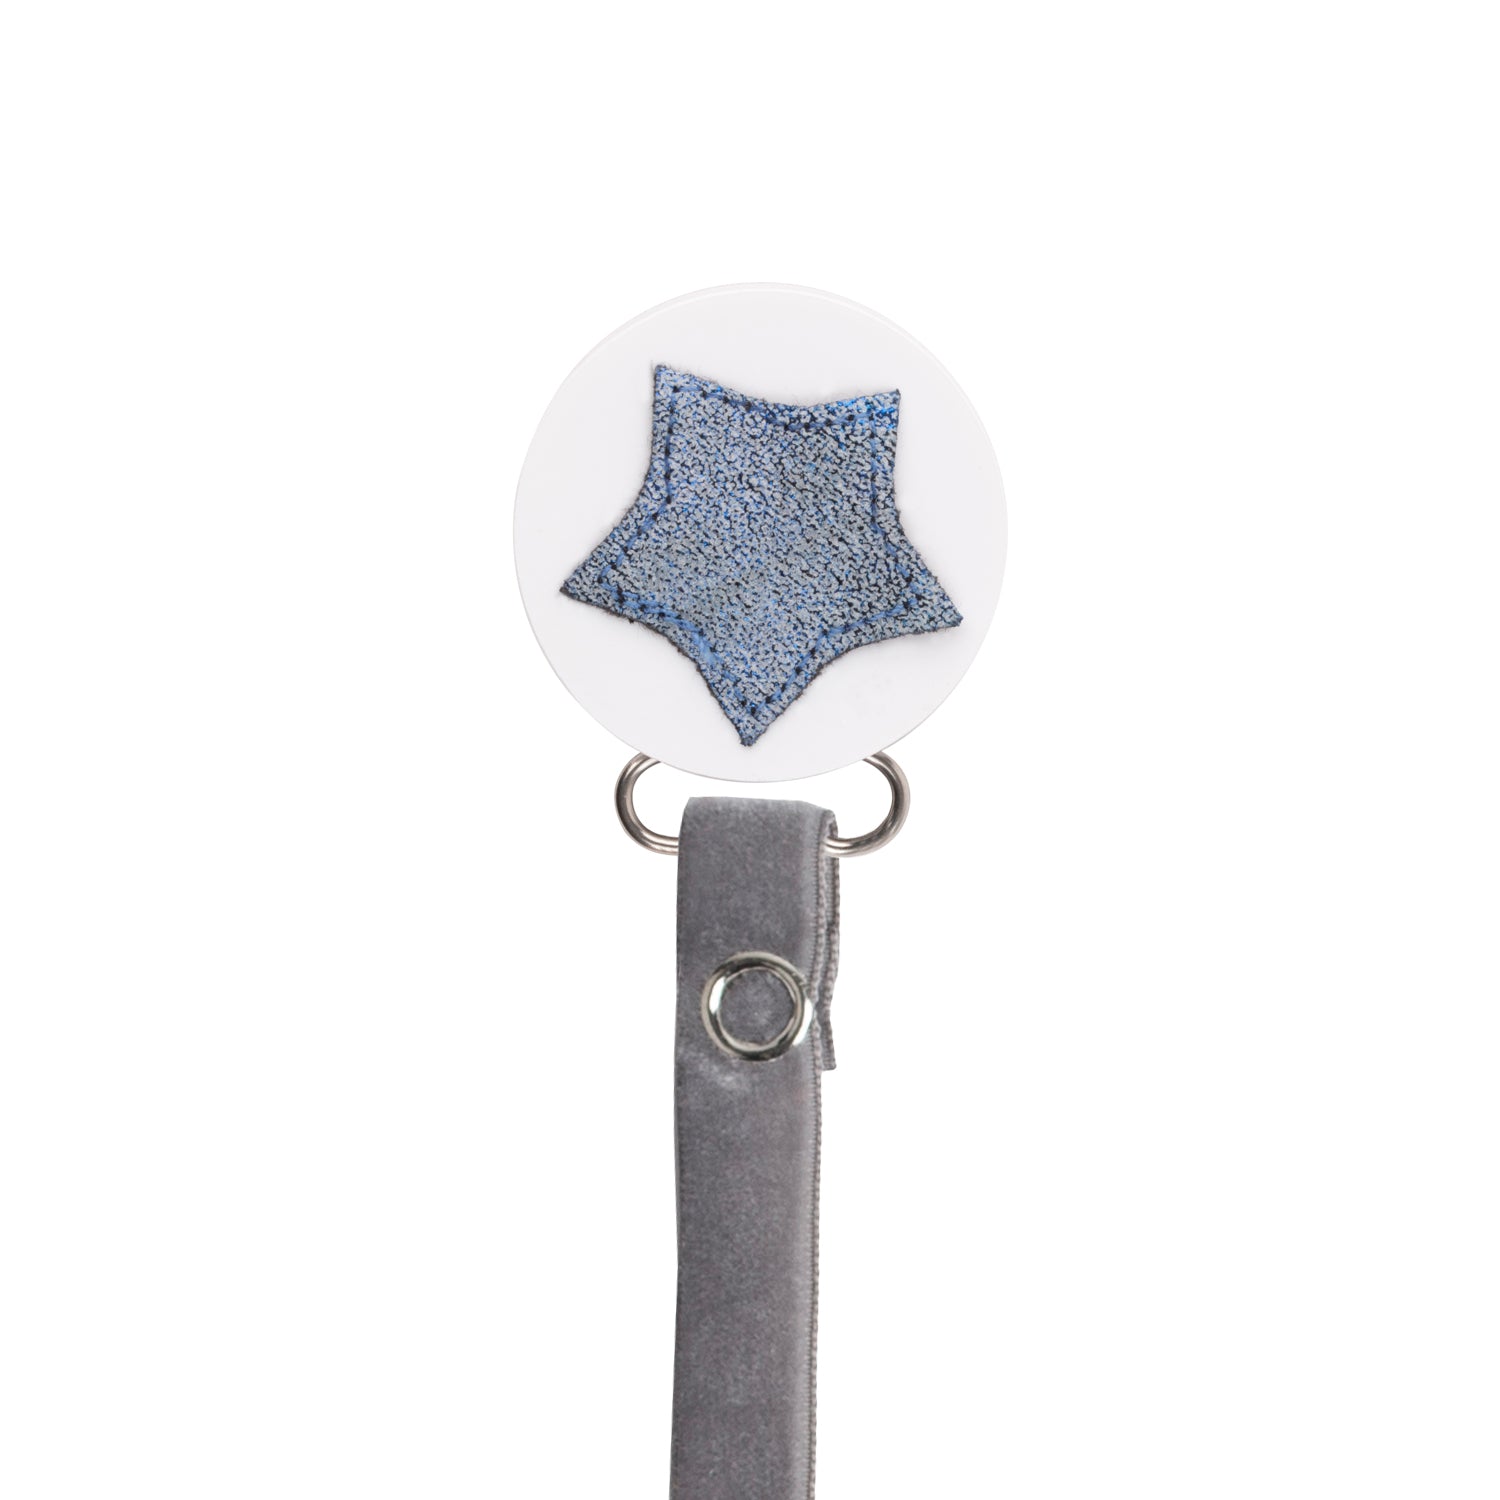 Classy Paci sparkle BLUE leather Star, Silver, Grey, girl boy baby pacifier clip GIFT SET